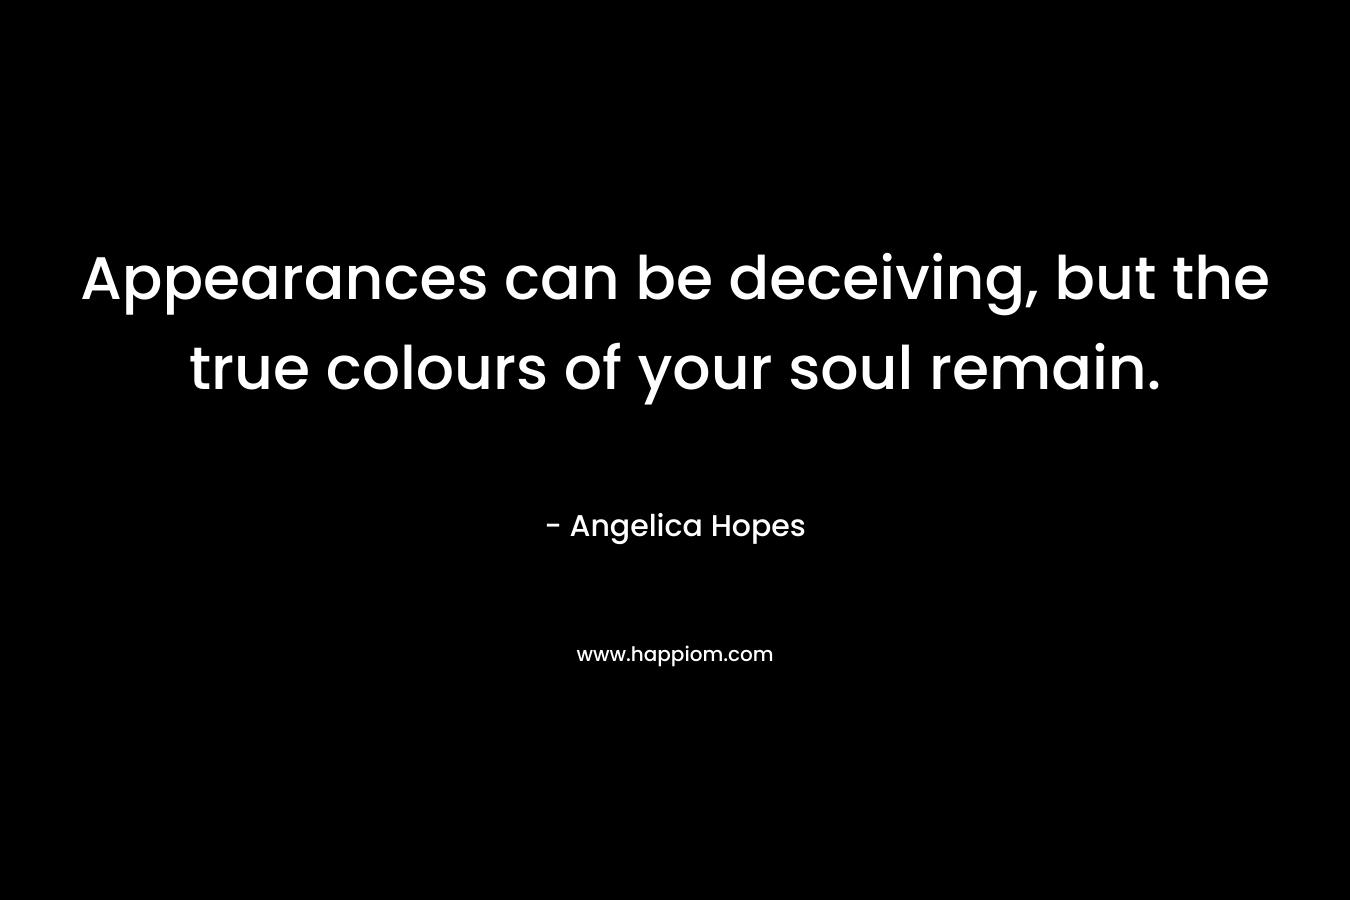 Appearances can be deceiving, but the true colours of your soul remain.